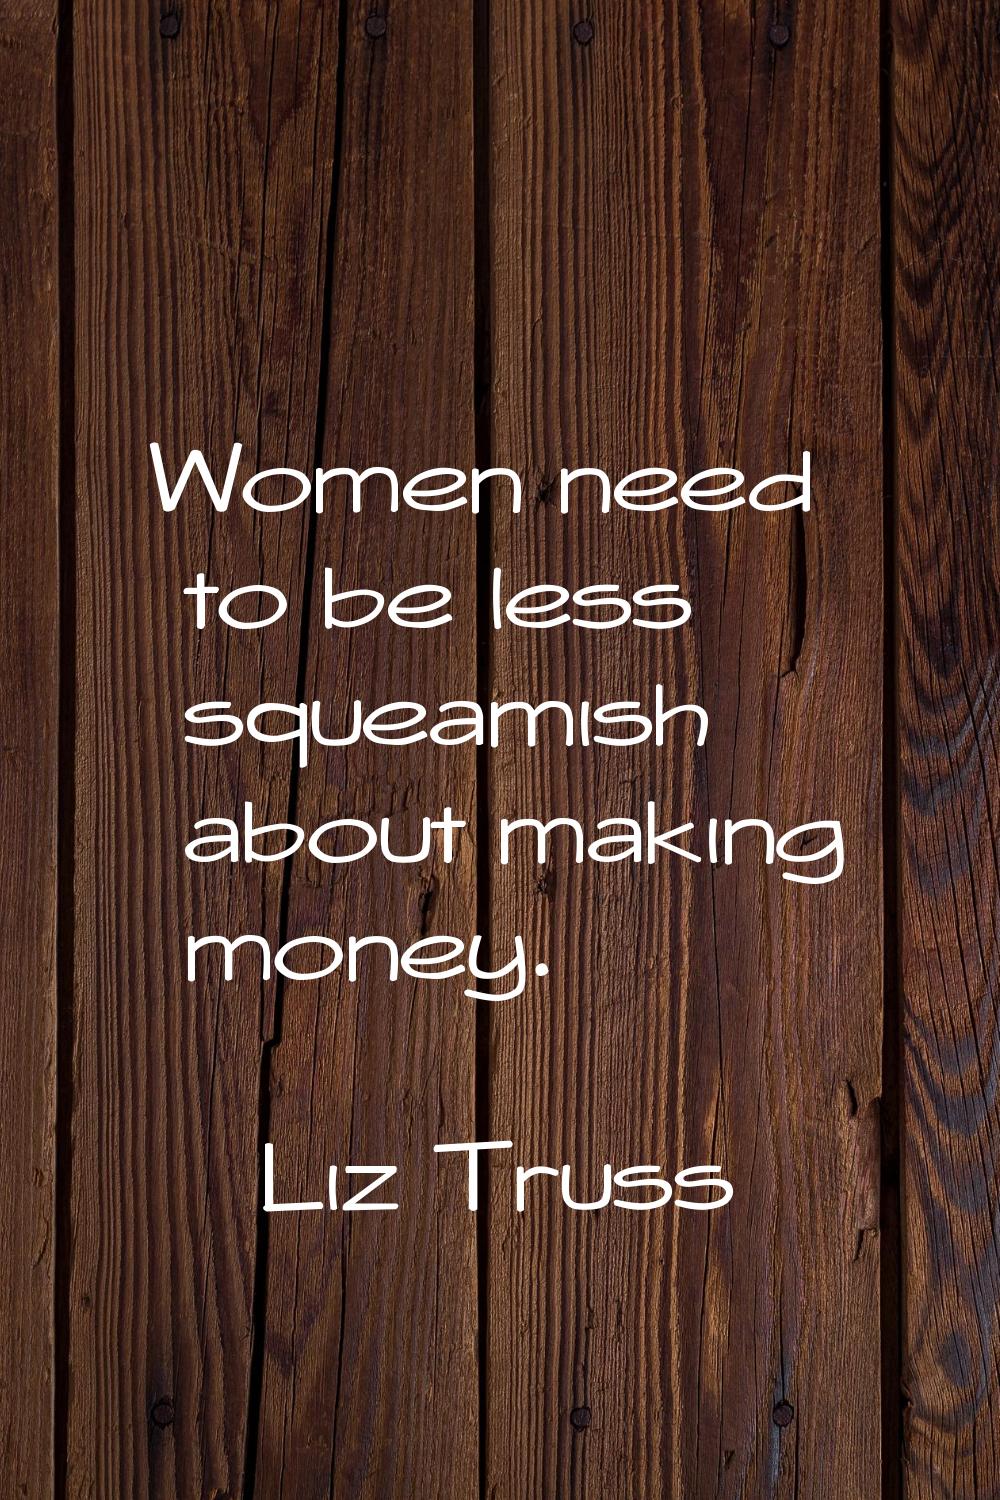 Women need to be less squeamish about making money.